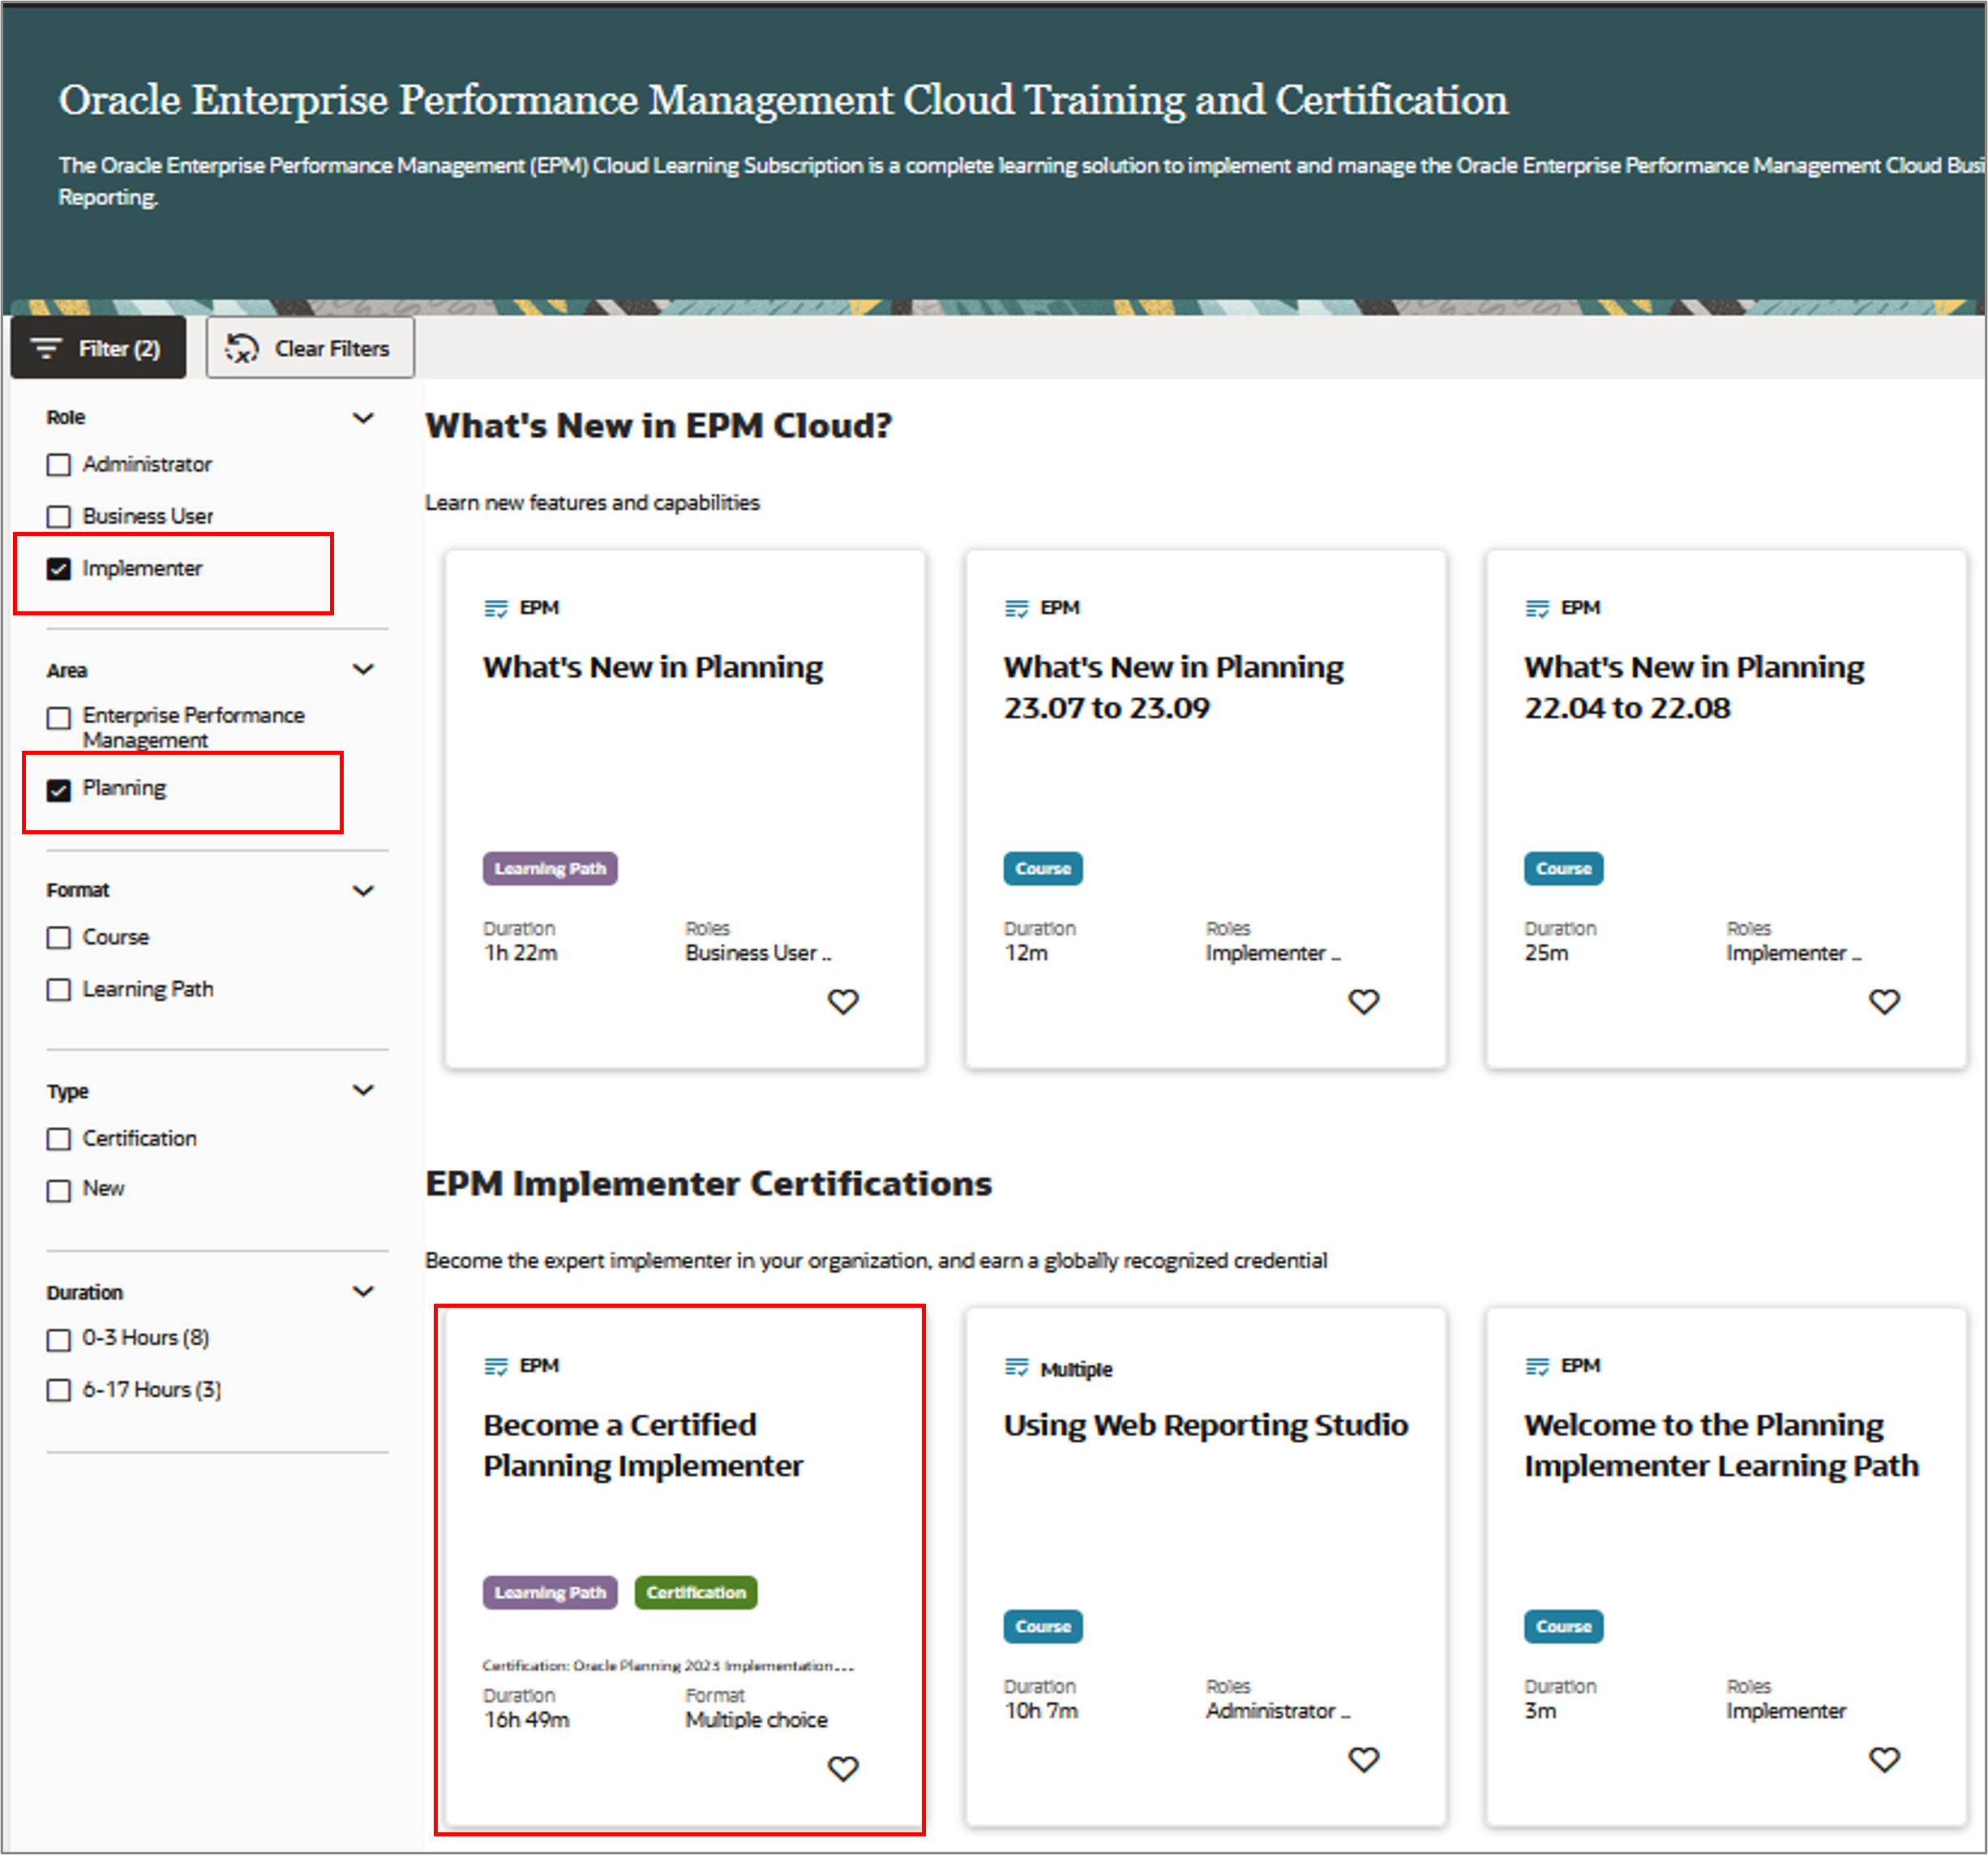 Get Started with EPM Cloud Planning_files/040104.png